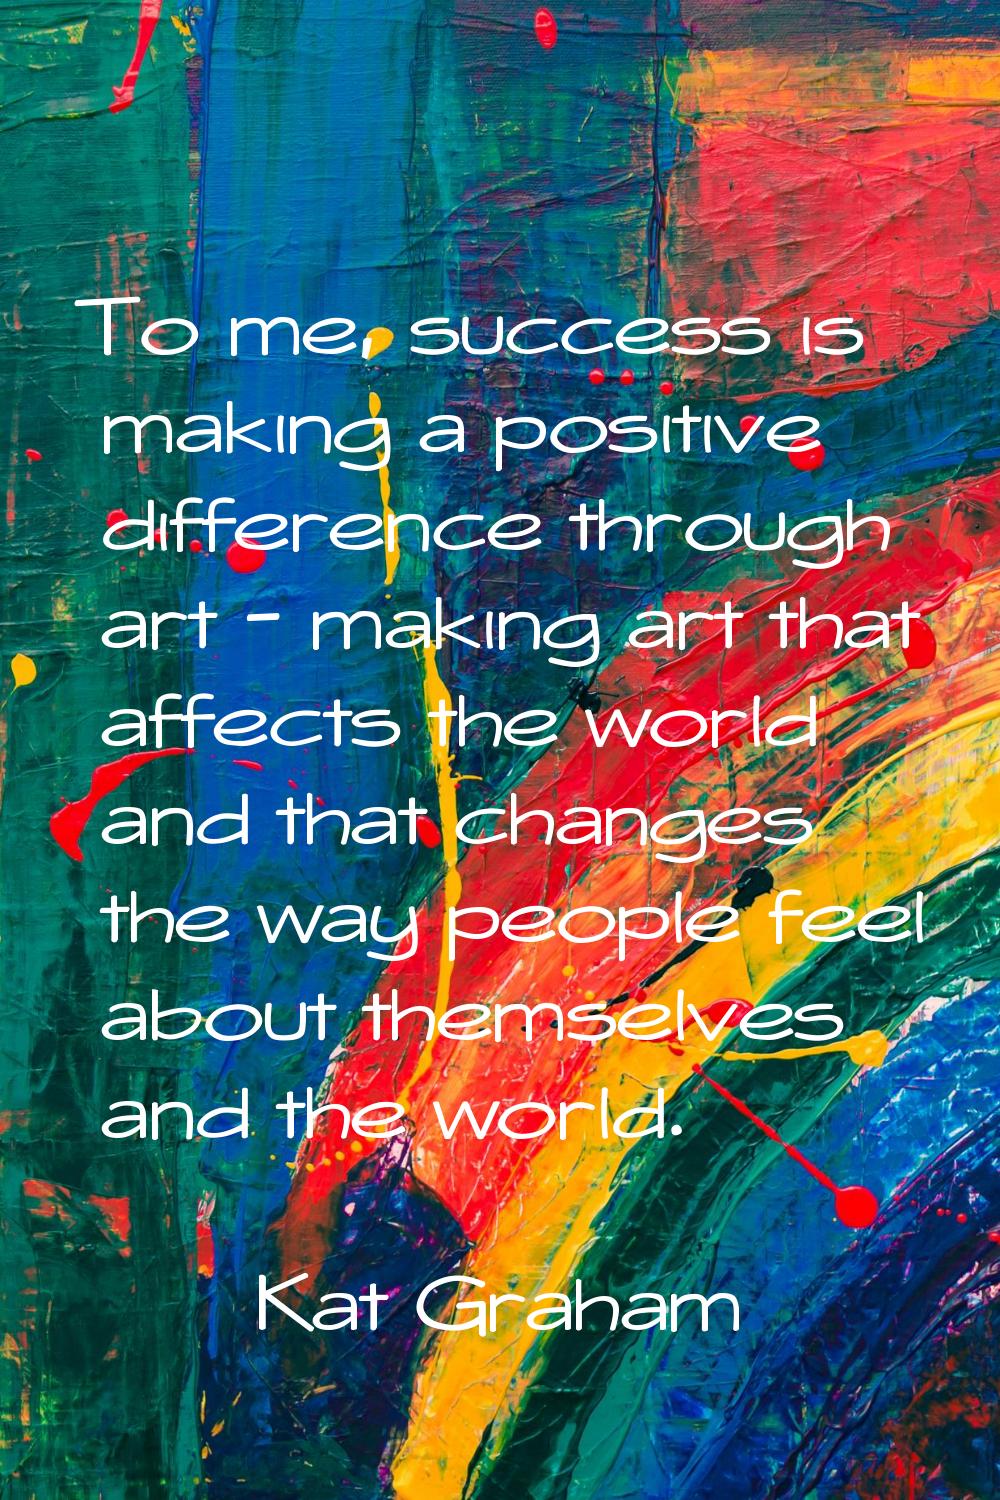 To me, success is making a positive difference through art - making art that affects the world and 